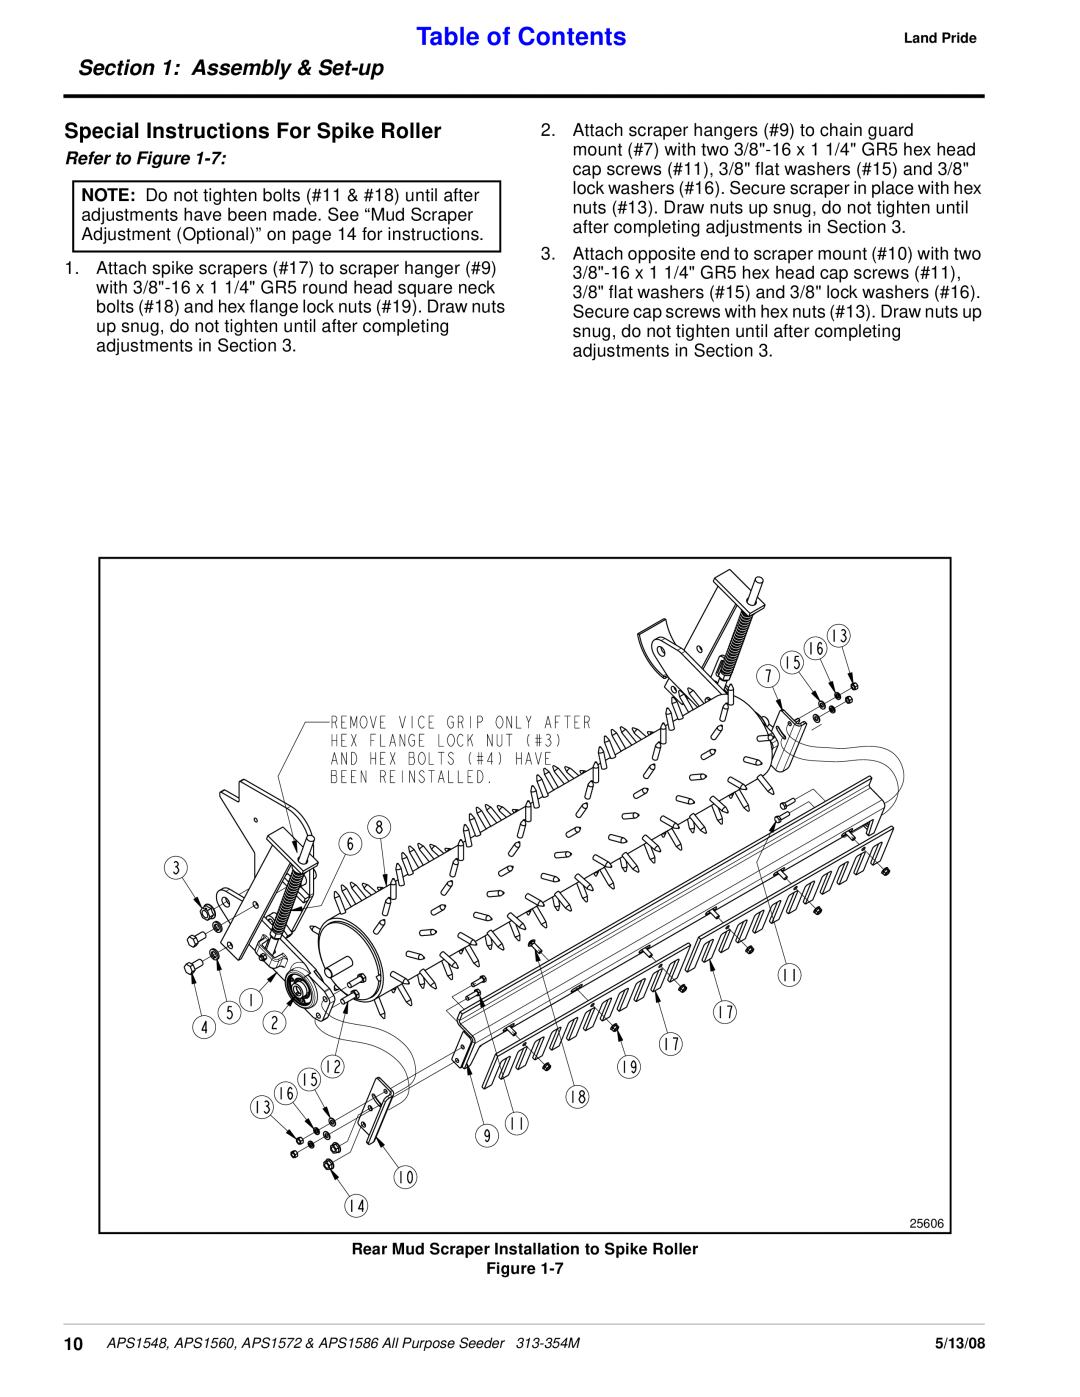 Land Pride APS1560, APS1572 Special Instructions For Spike Roller, Table of Contents, Assembly & Set-up, Refer to Figure 